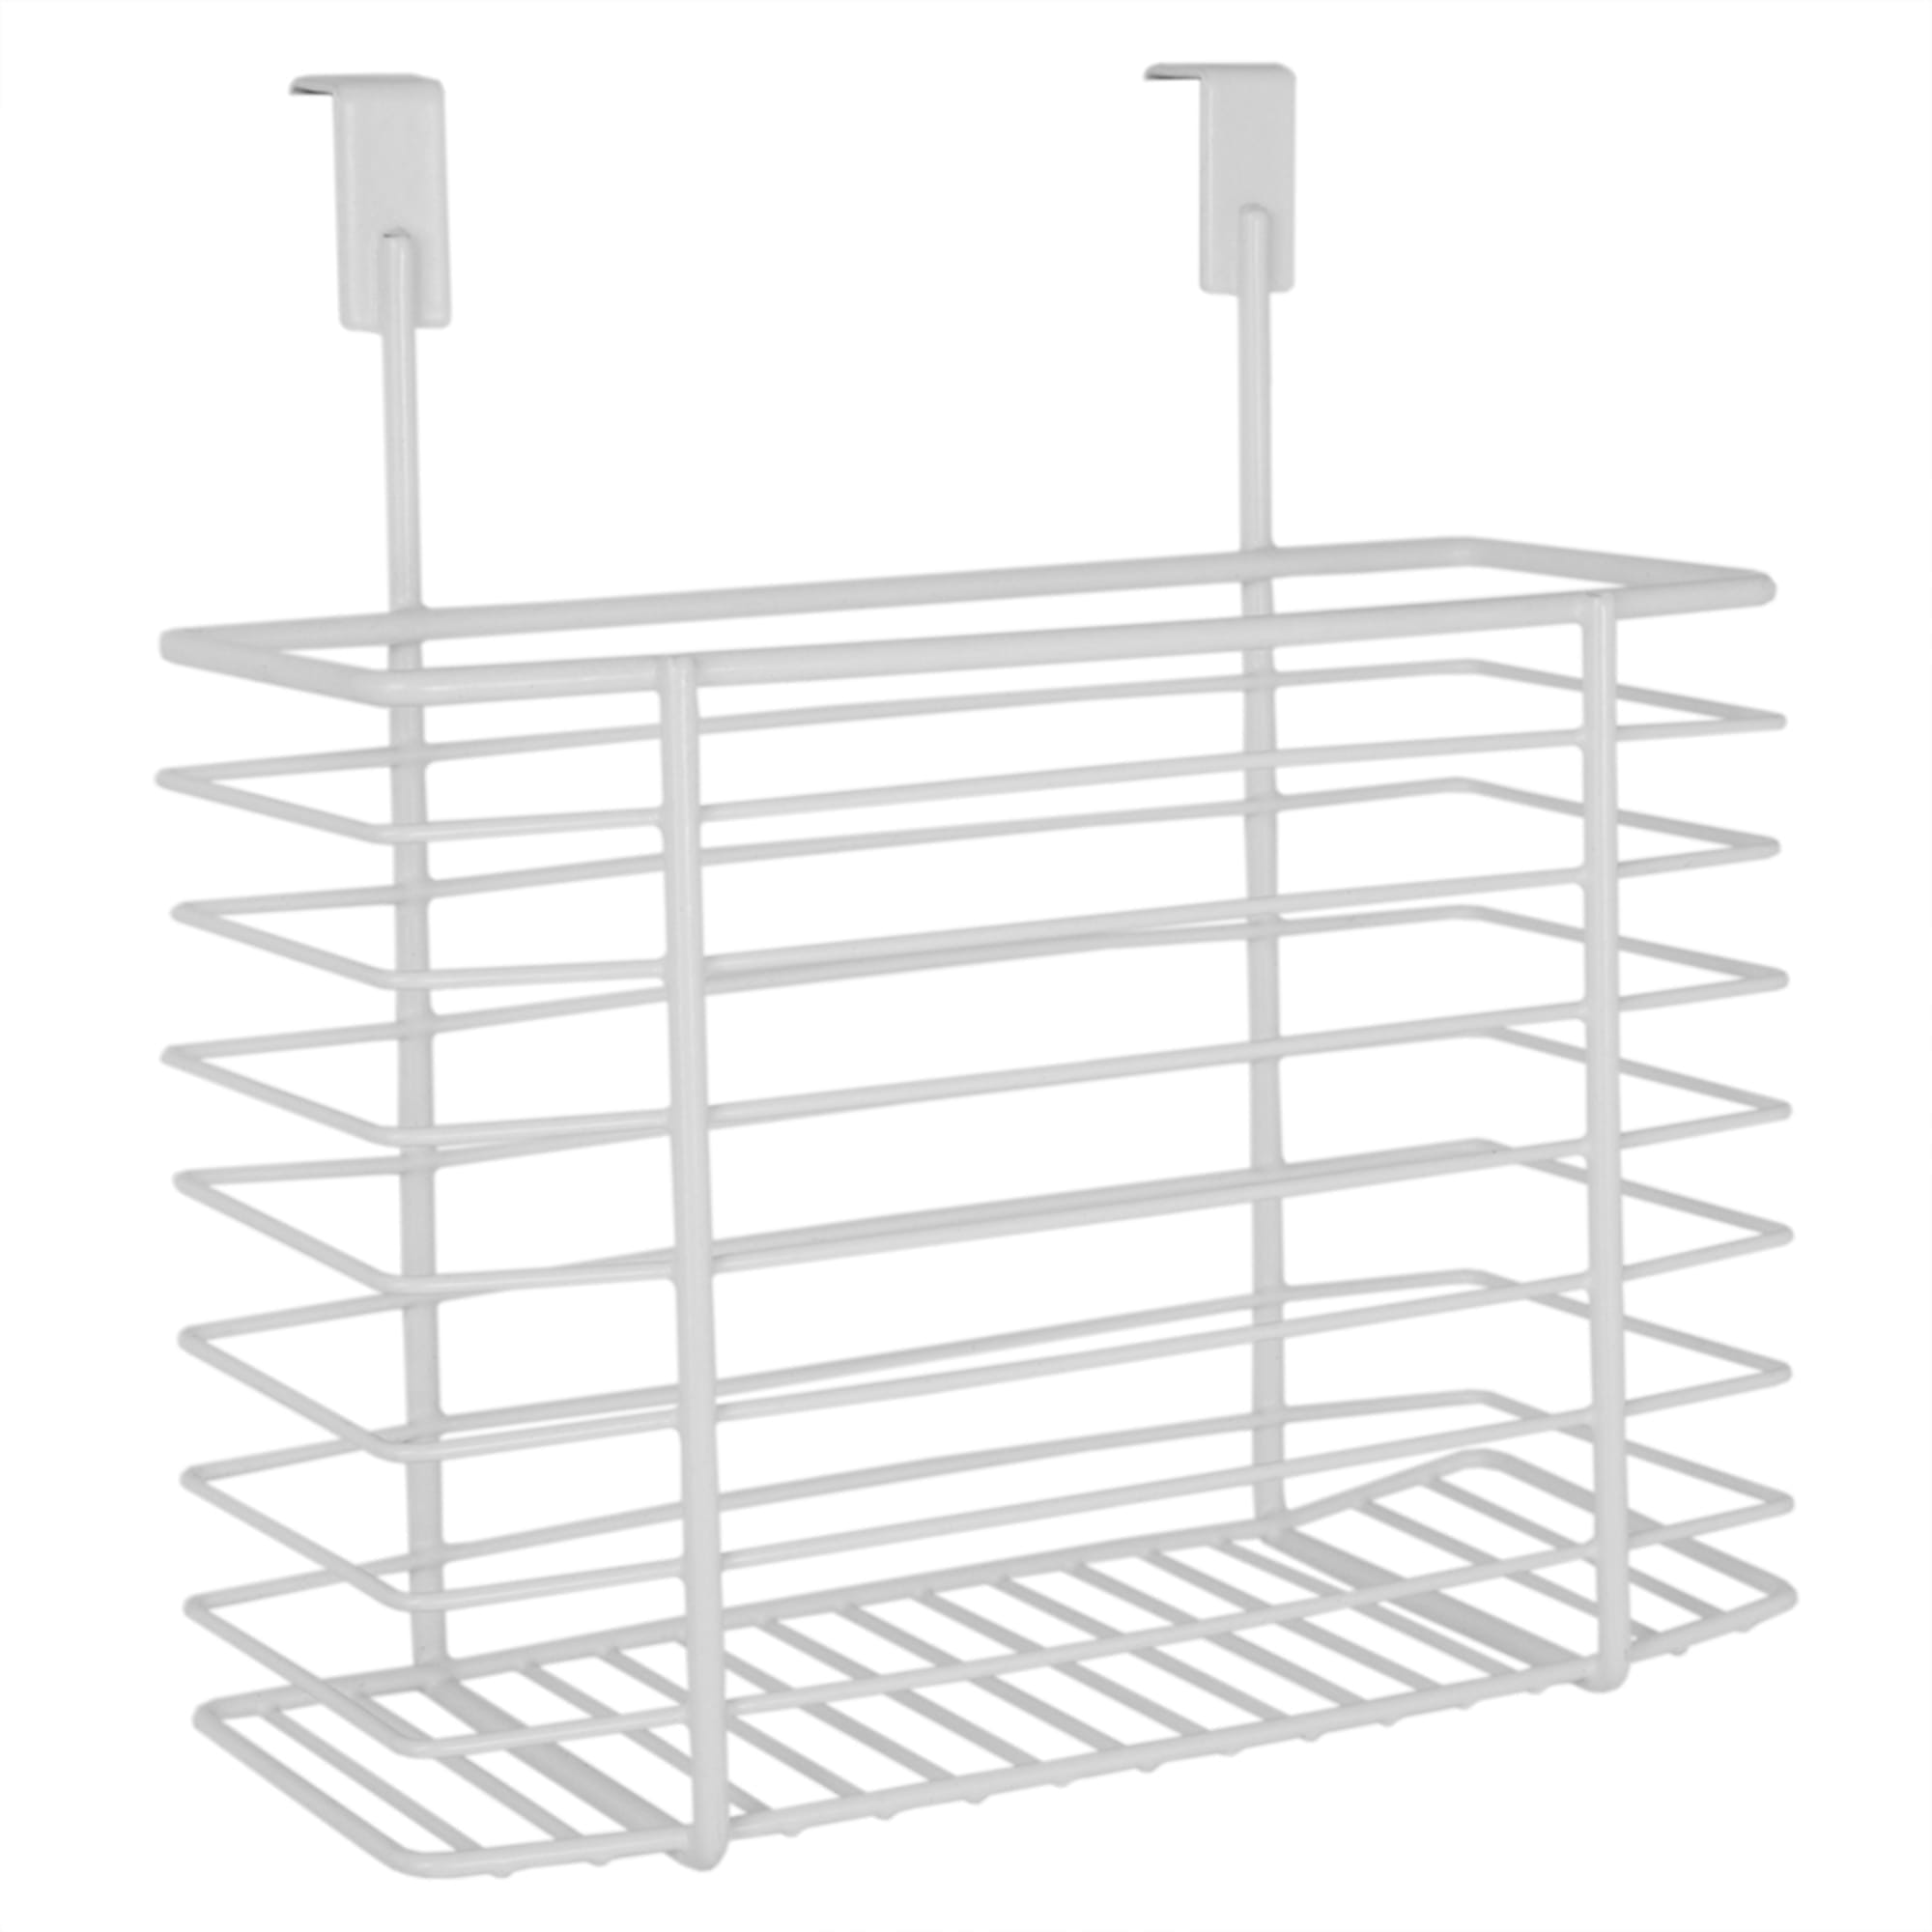 Home Basics Over the Cabinet Basket $5 EACH, CASE PACK OF 6